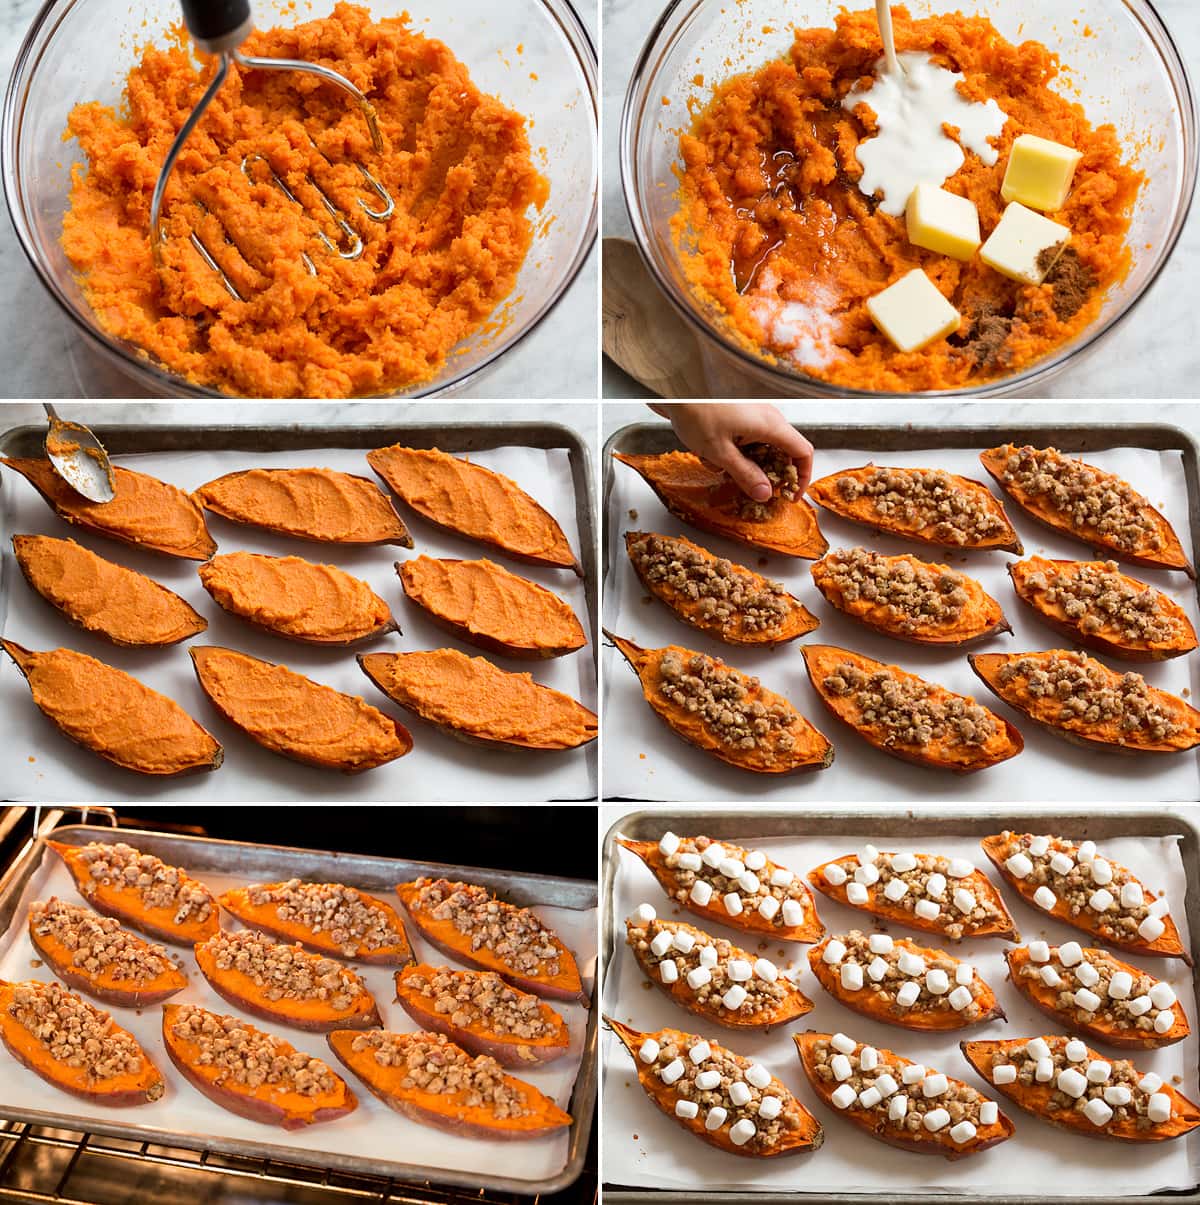 Six continued steps of making twice baked sweet potatoes.